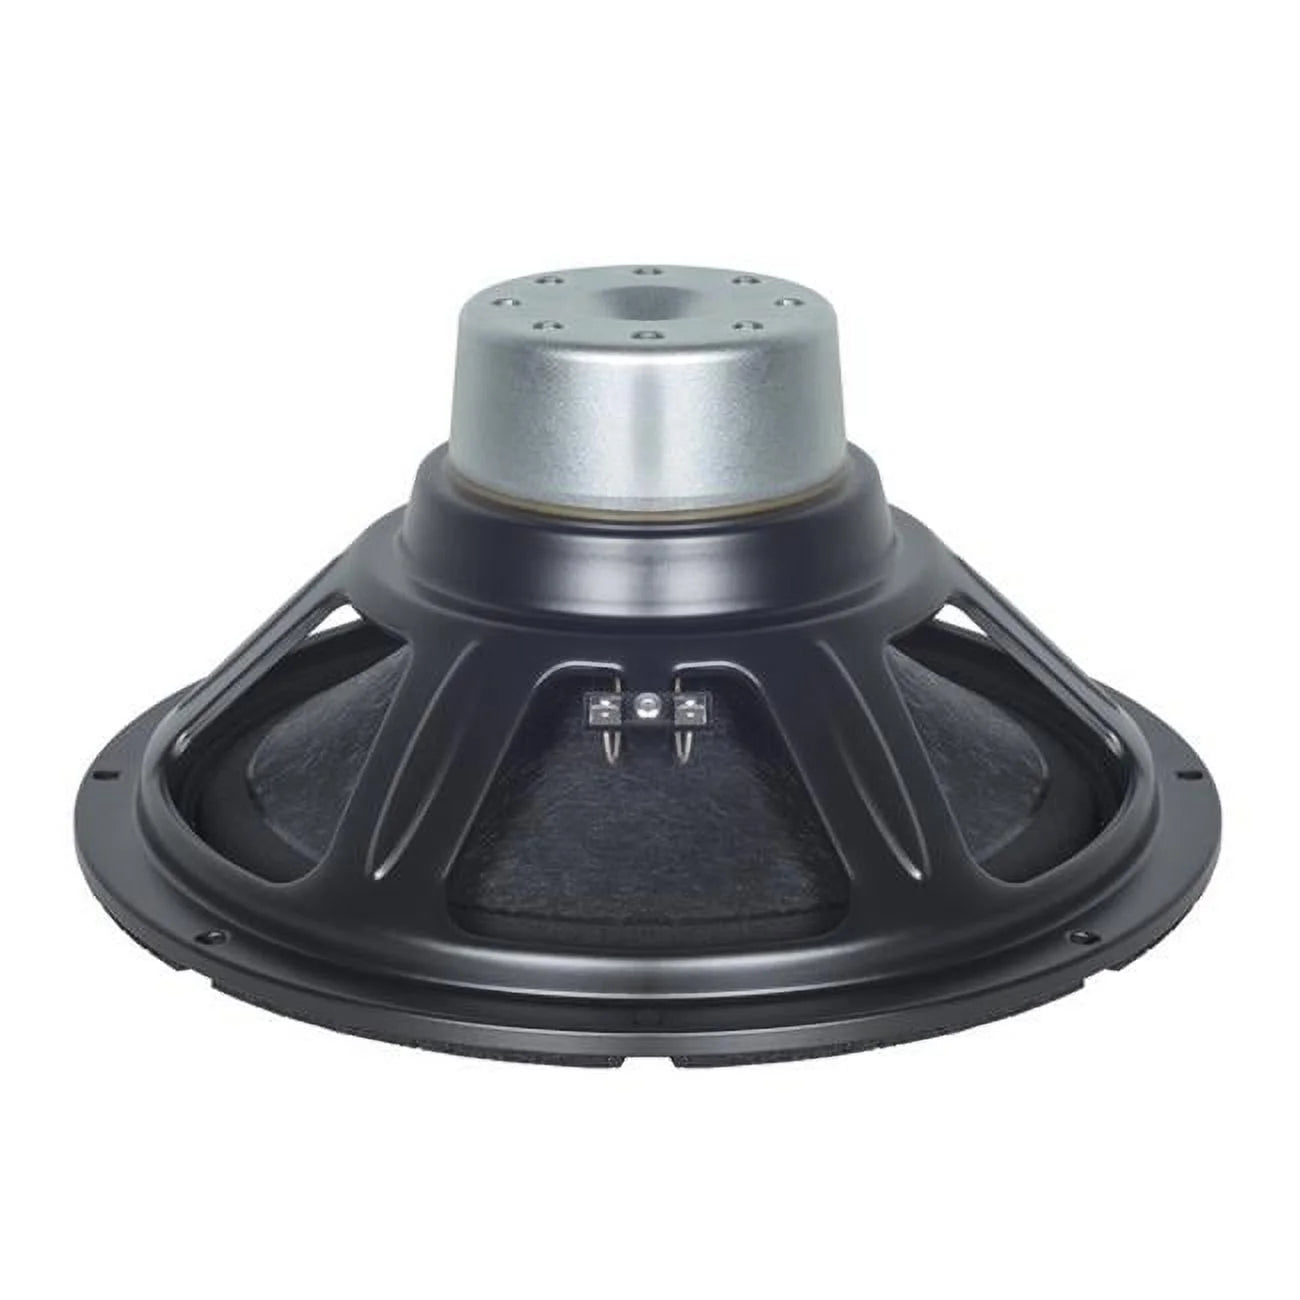 12.0 in. Woofer with 8 Ohms Impedance & 700W Continuous Power Handling Capacity & Neodymium Inside Slug Magnet